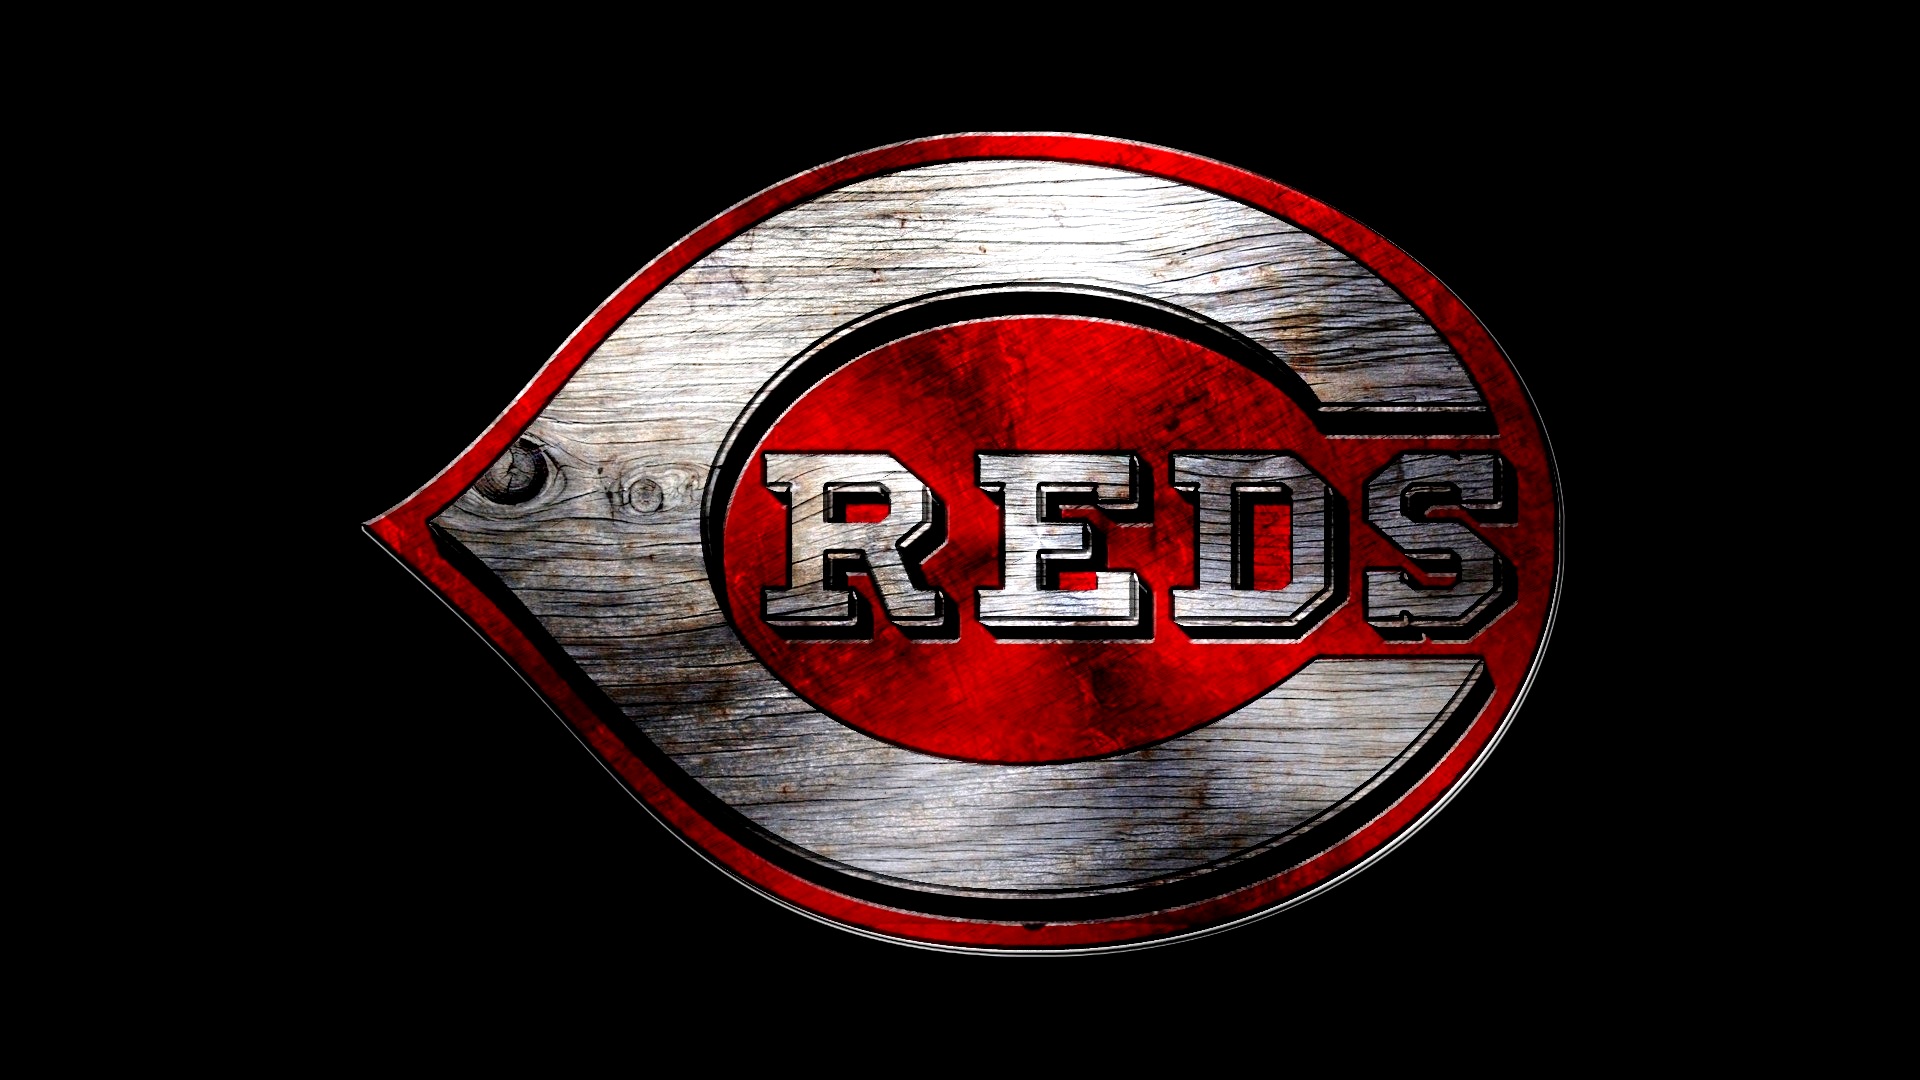 Cincinnati Reds Wallpaper For Mac Wallpaper with high-resolution 1920x1080 pixel. You can use this wallpaper for Mac Desktop Wallpaper, Laptop Screensavers, Android Wallpapers, Tablet or iPhone Home Screen and another mobile phone device